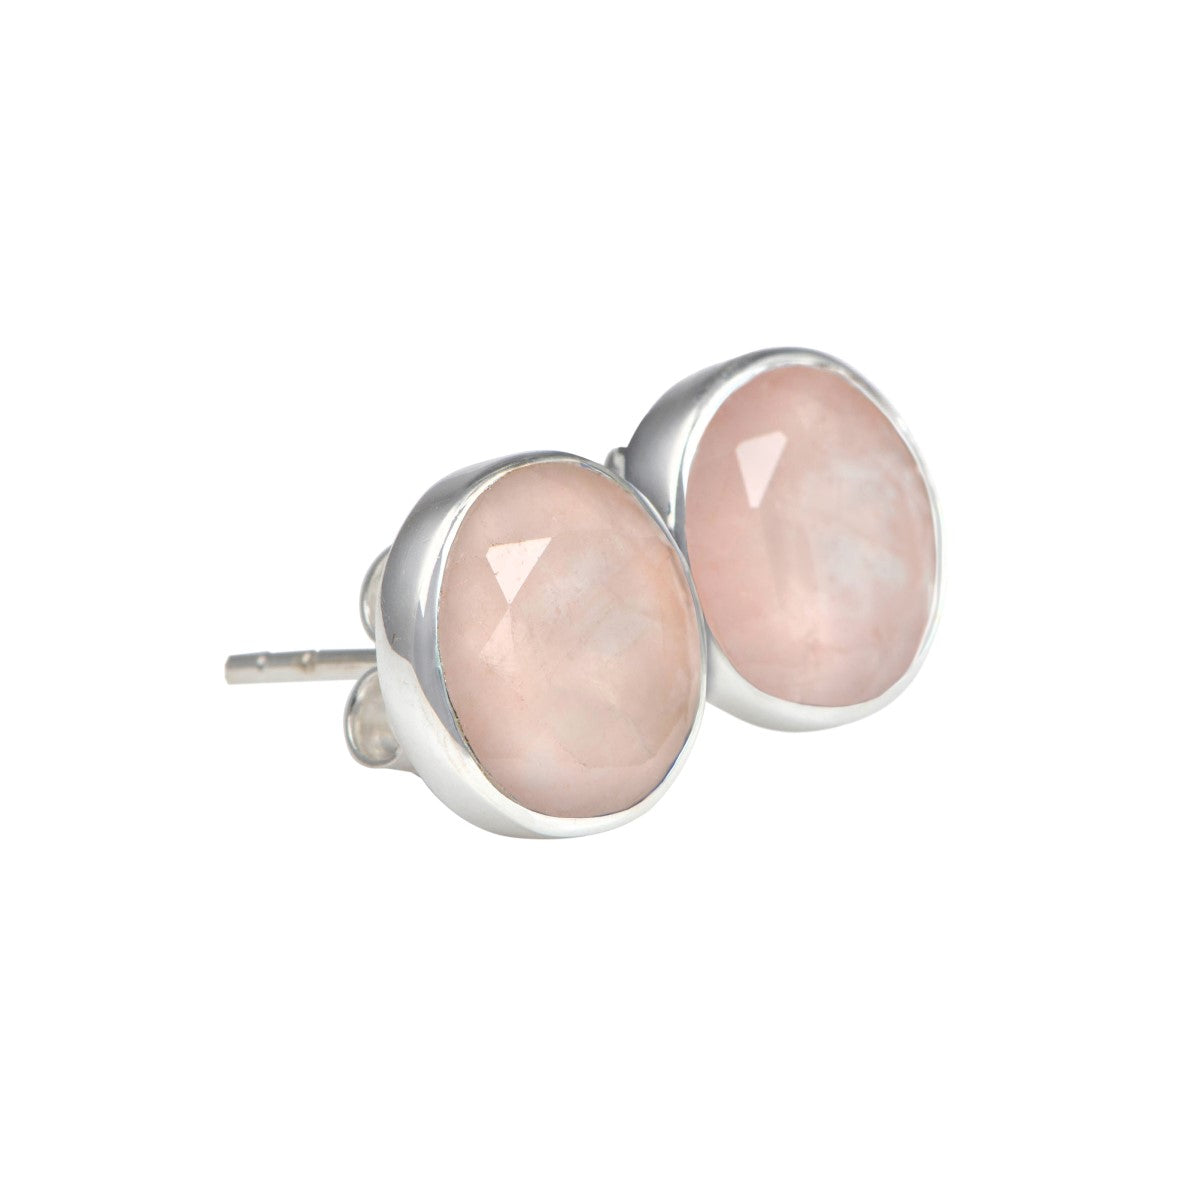 Rose Quartz Studs in Sterling Silver with a Round Faceted Gemstone